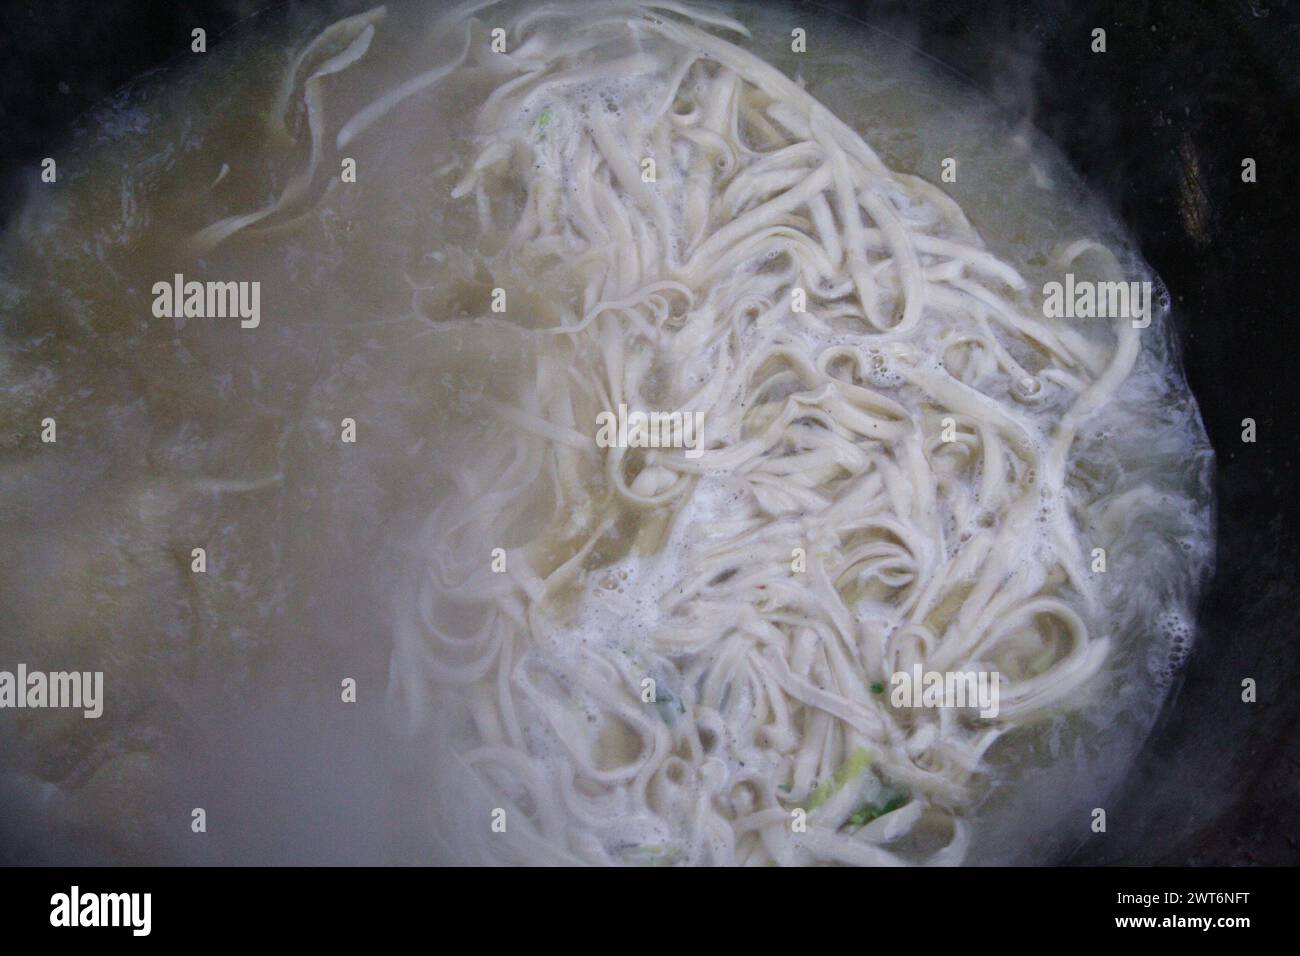 Cooking noodles, Shaanxi Province, China Stock Photo